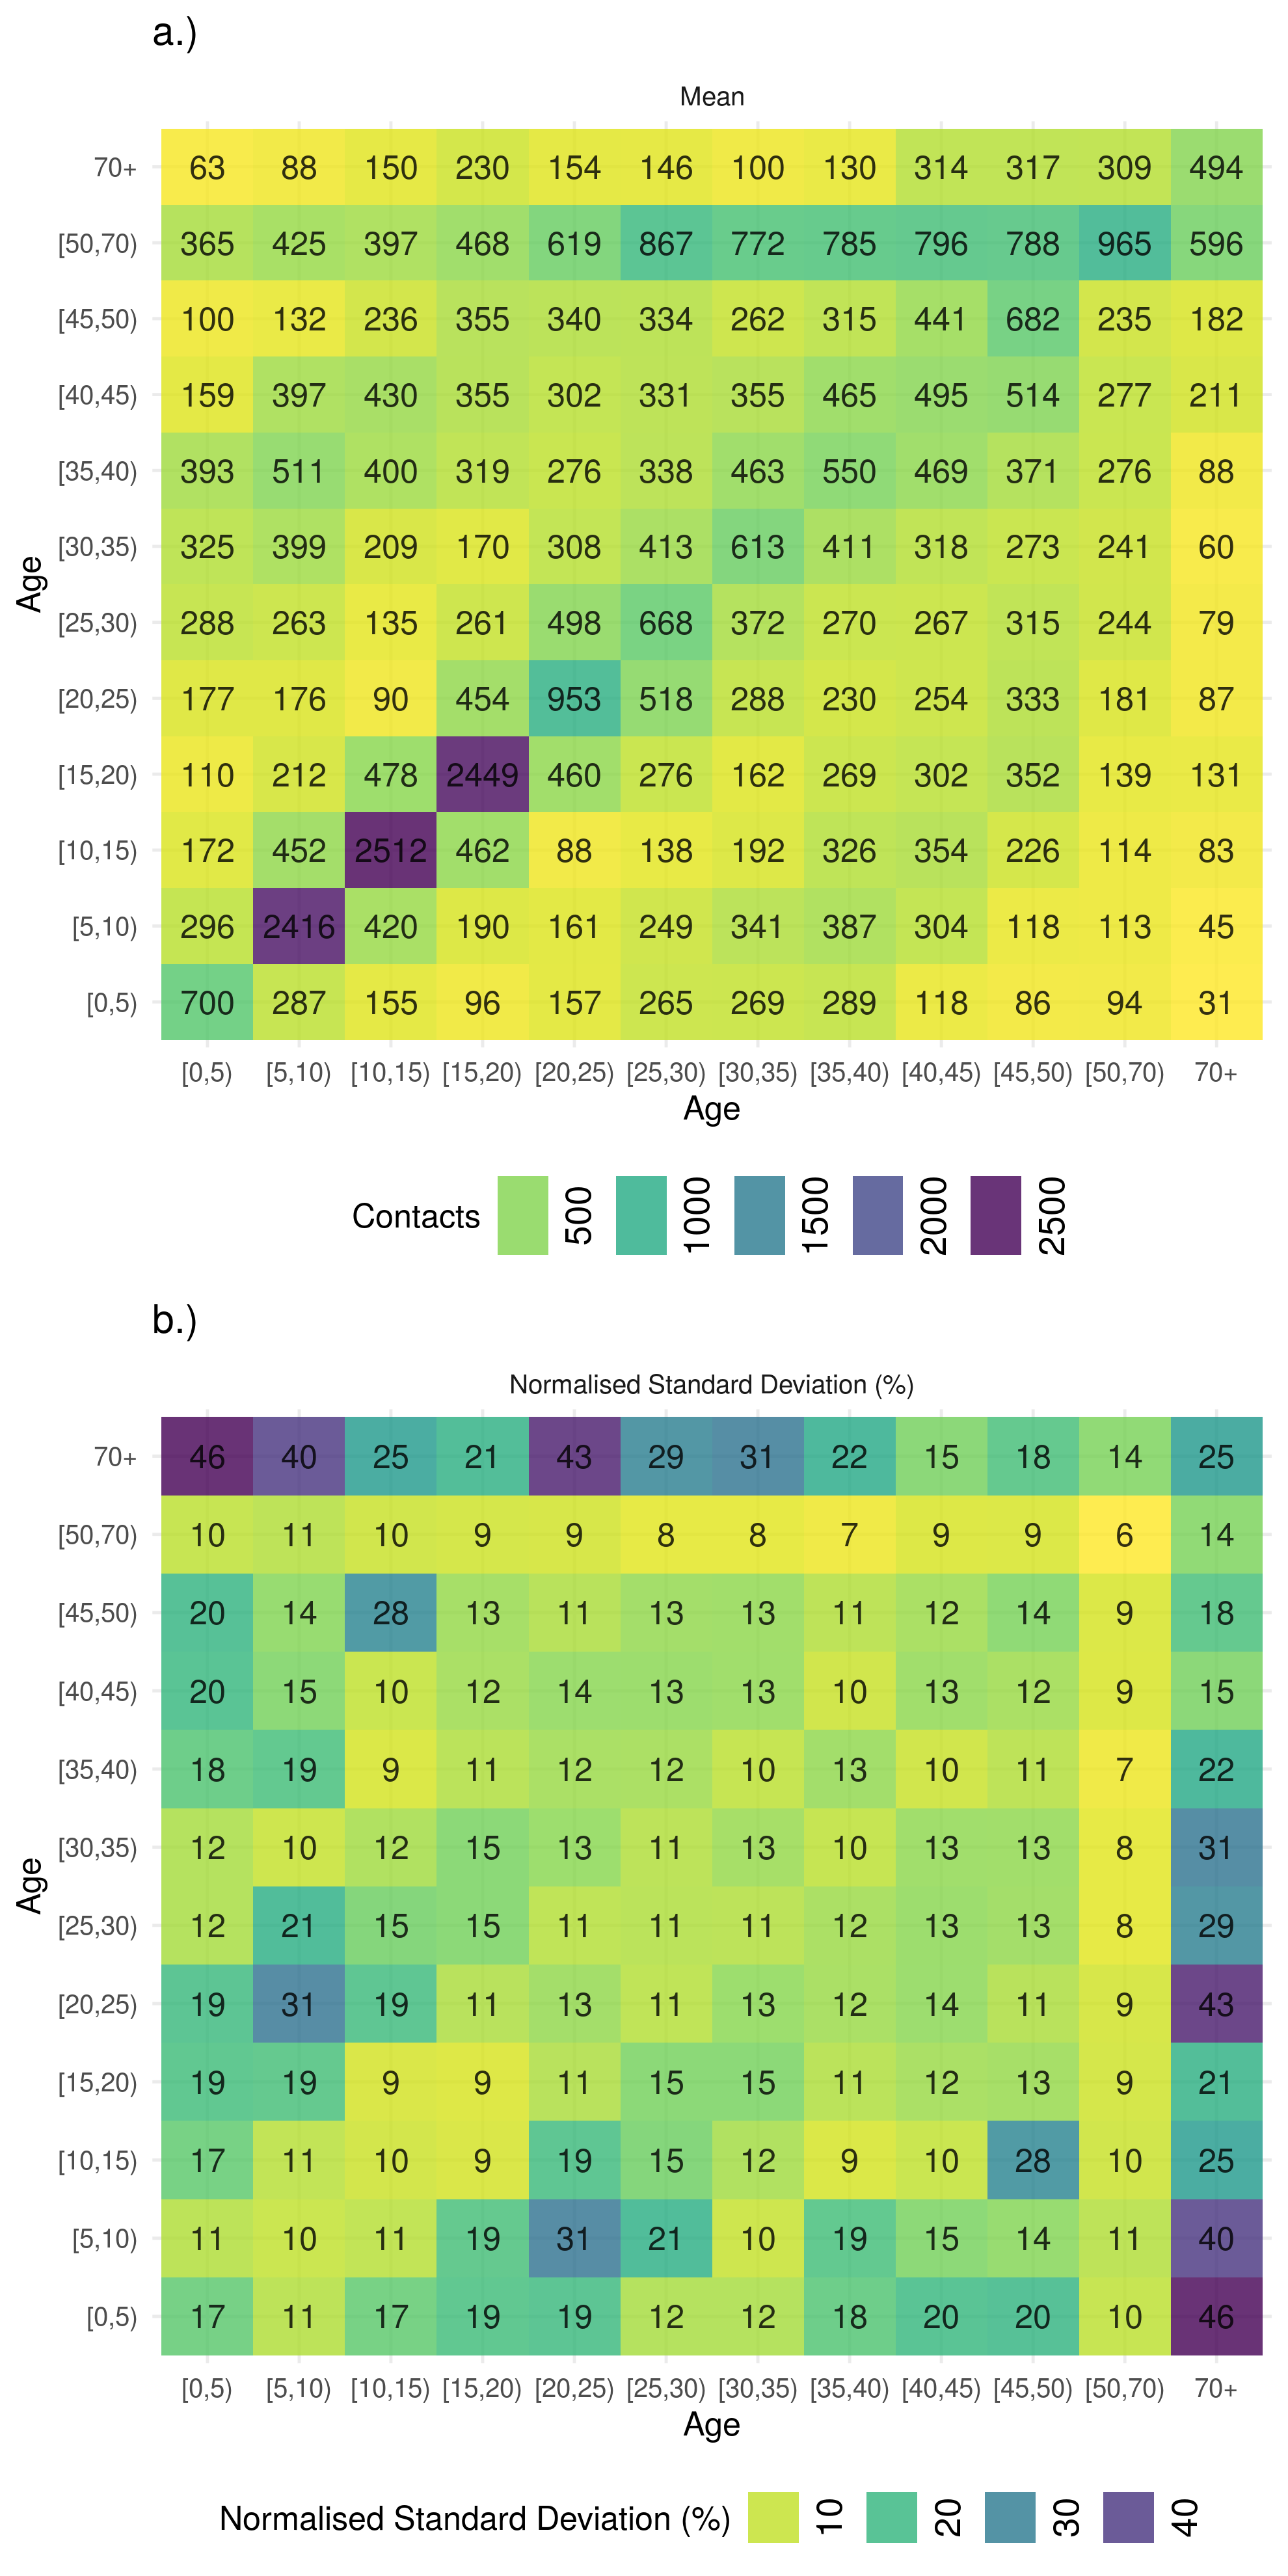 a.) Mean contacts (non-unique social contacts per year) and the b.) normalised standard deviation (\%) of 1000 boostrapped samples of  social contacts from the POLYMOD social contact survey using 5 year age groups up 49 years old and then a single group for 50-69 year olds. Mixing is highly assortative by age with children and young adults representing the majority of contacts. There is also evidence of mixing between children and middle age adults with older children mixing with progressivly older adults. Contact rates in older adults are highly uncertain, with the most uncertainty in mixing between older adults and young children.